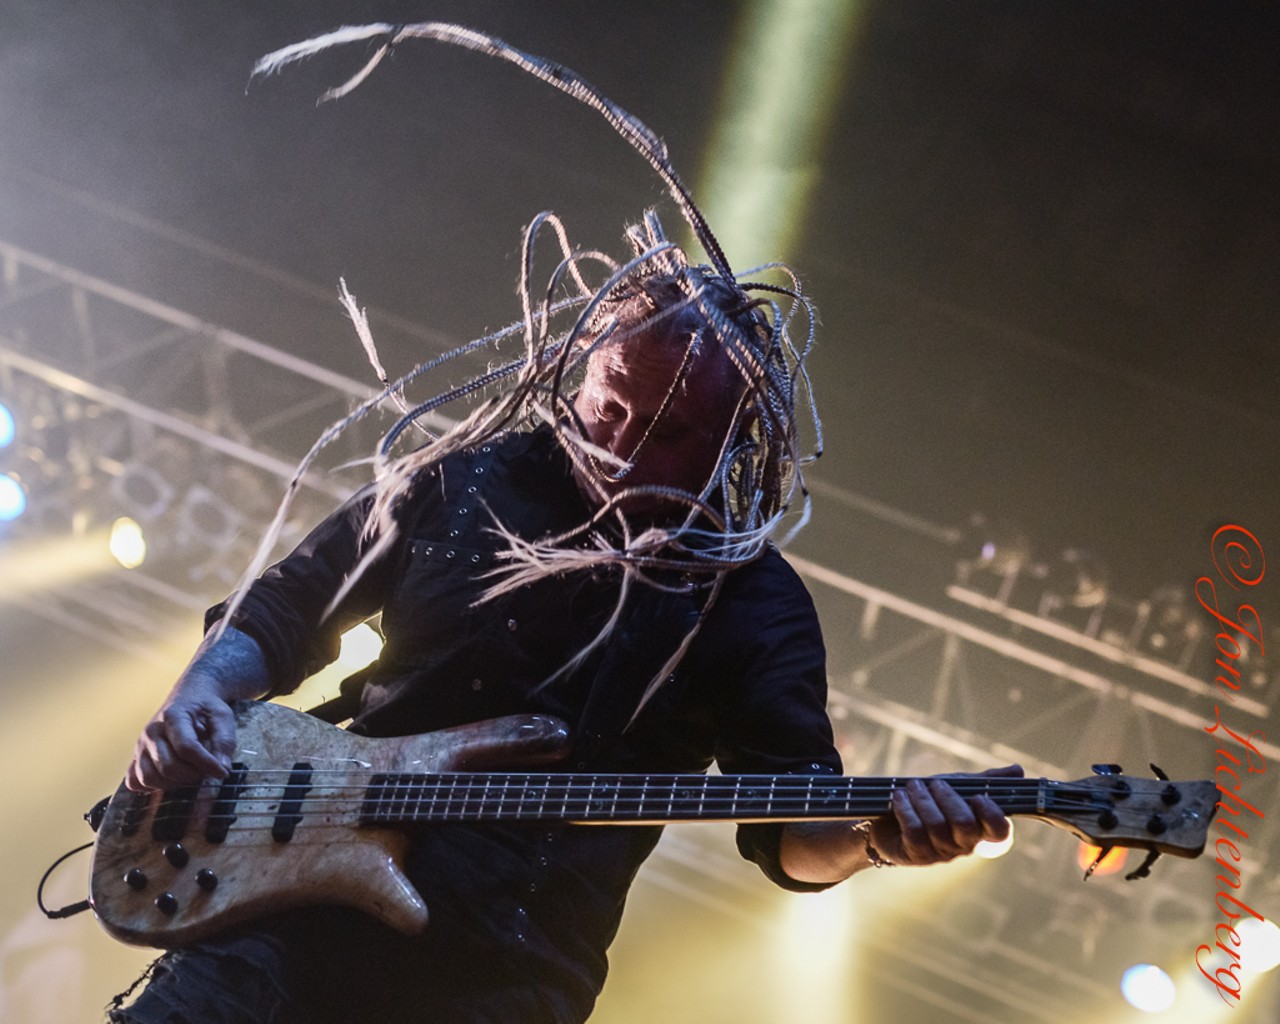 PHOTOS: Dragonforce and Kamelot performing at the Agora Theater